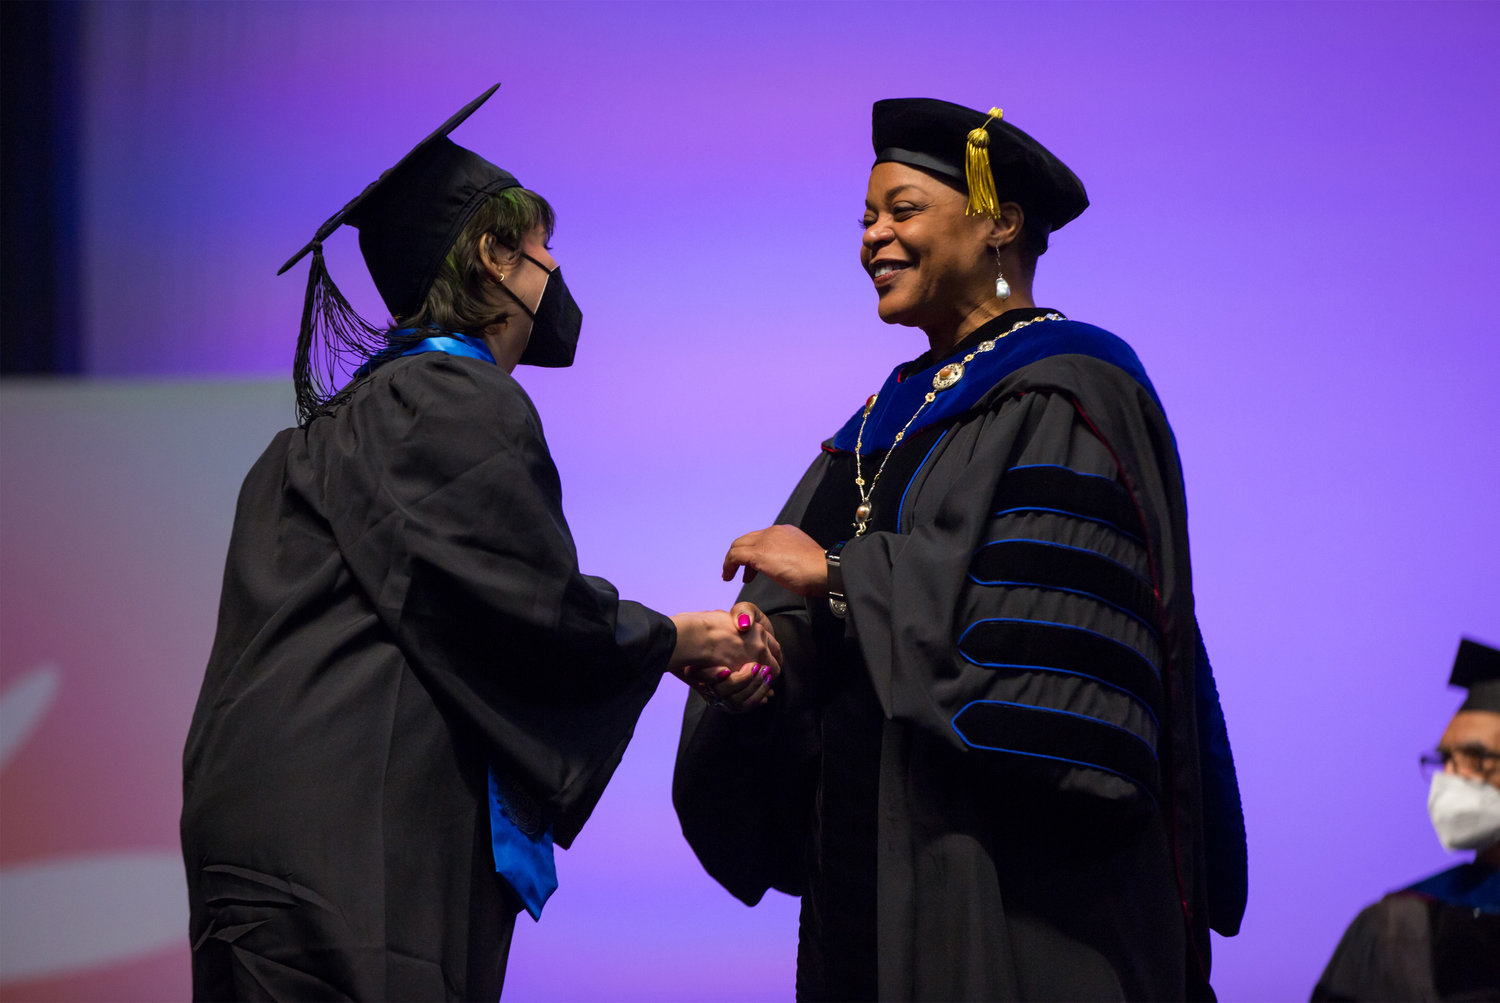 During her first RISD commencement as president, Williams greeted grads from the class of 2022 as well as many 2020 alumni who walked on this year’s ceremony stage